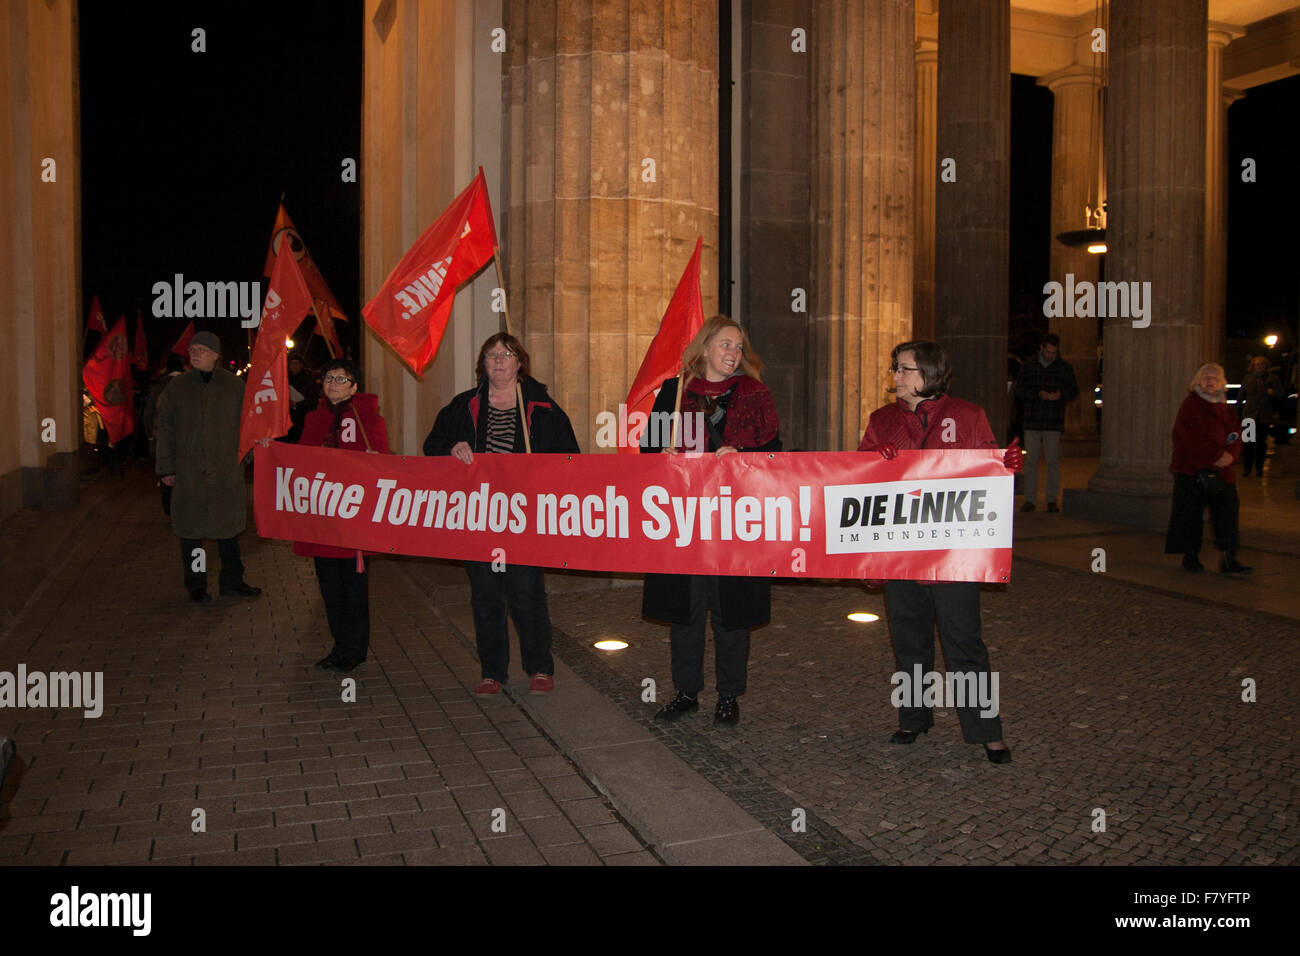 Berlin, Germany. 3rd December, 2015. Demonstration against a German military intervention in Syria. 'No Tornados (German jet fighter) to Syria' Stock Photo